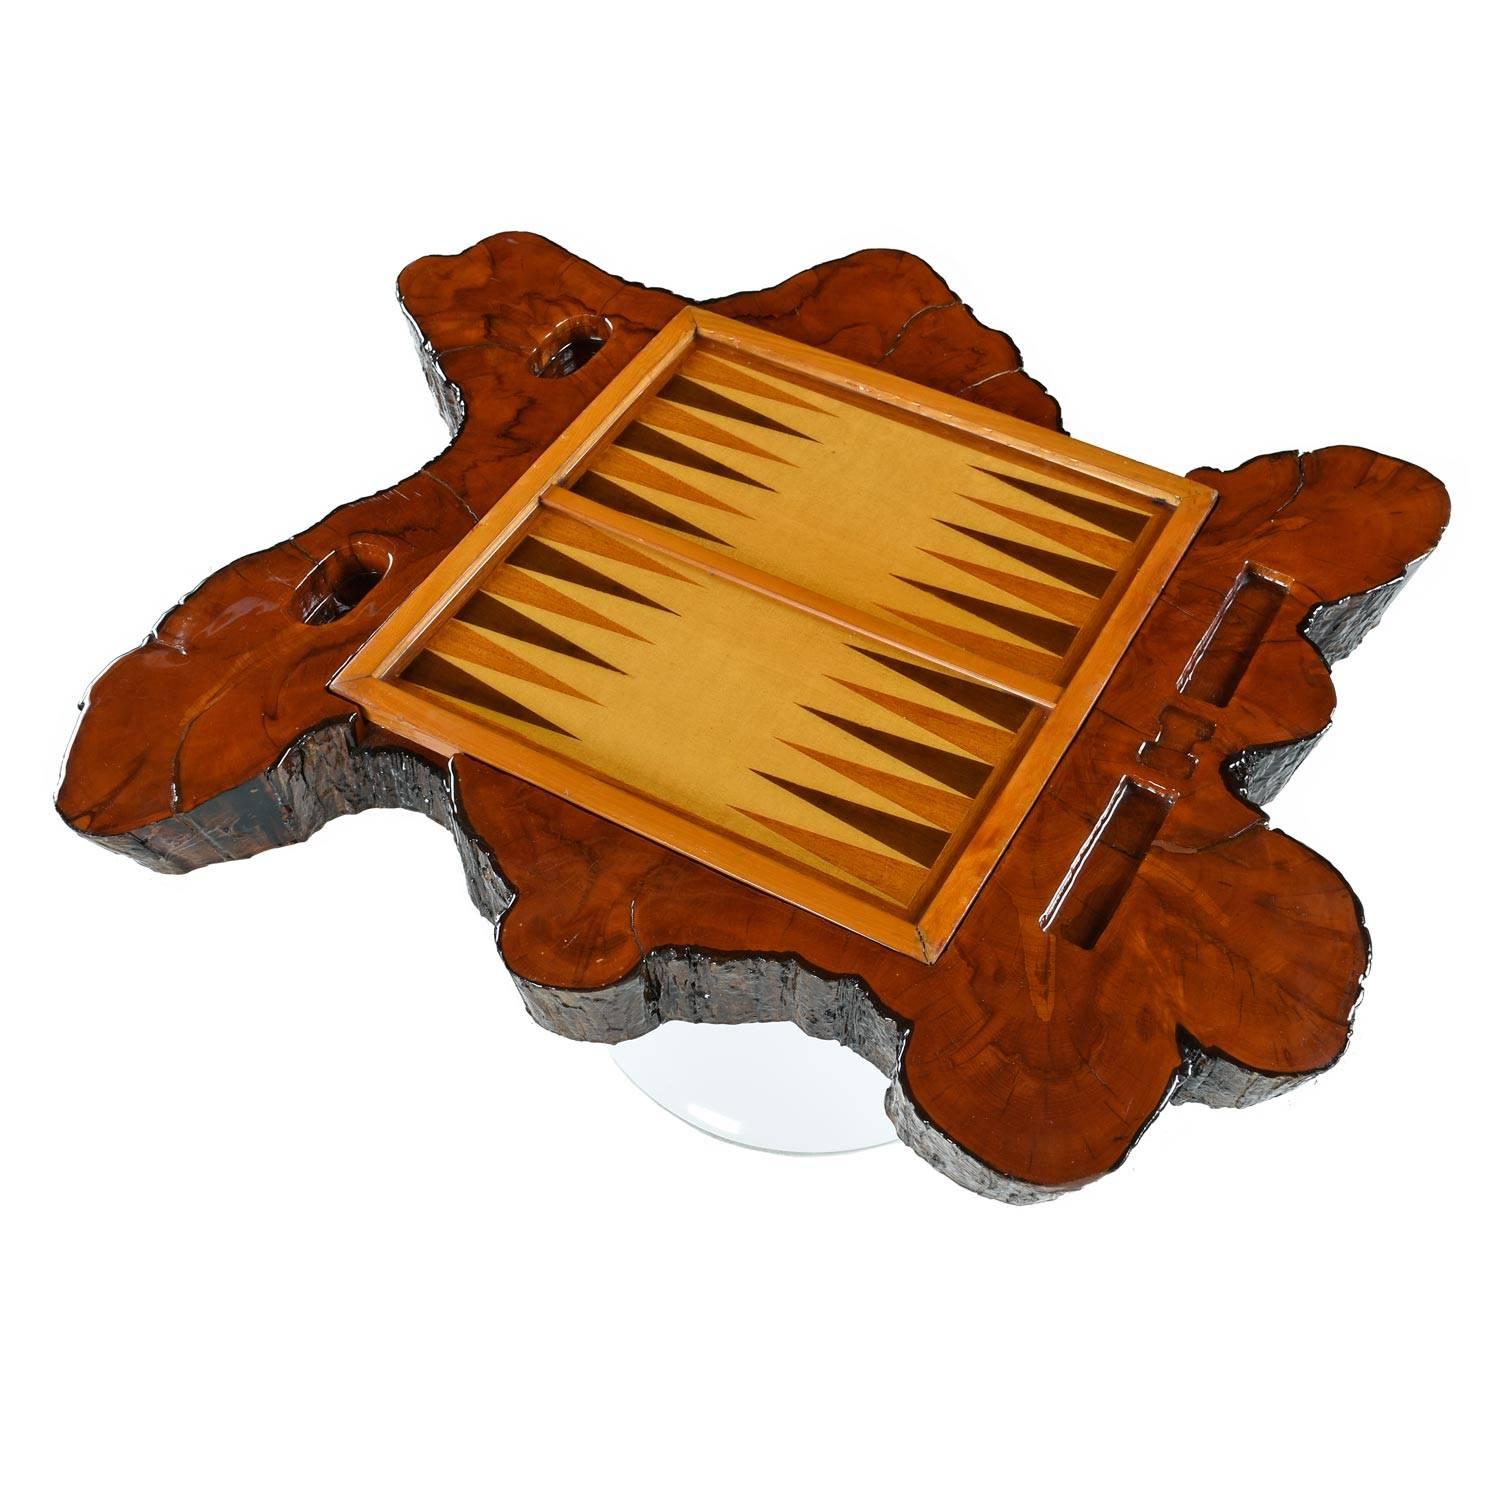 This unique vintage cypress root chess/backgammon gaming table is constructed of live edge cypress slab. The centre of the slab hosts a reversible game board. One side for backgammon, flip to reveal a chess or checkerboard field. Gullies along the